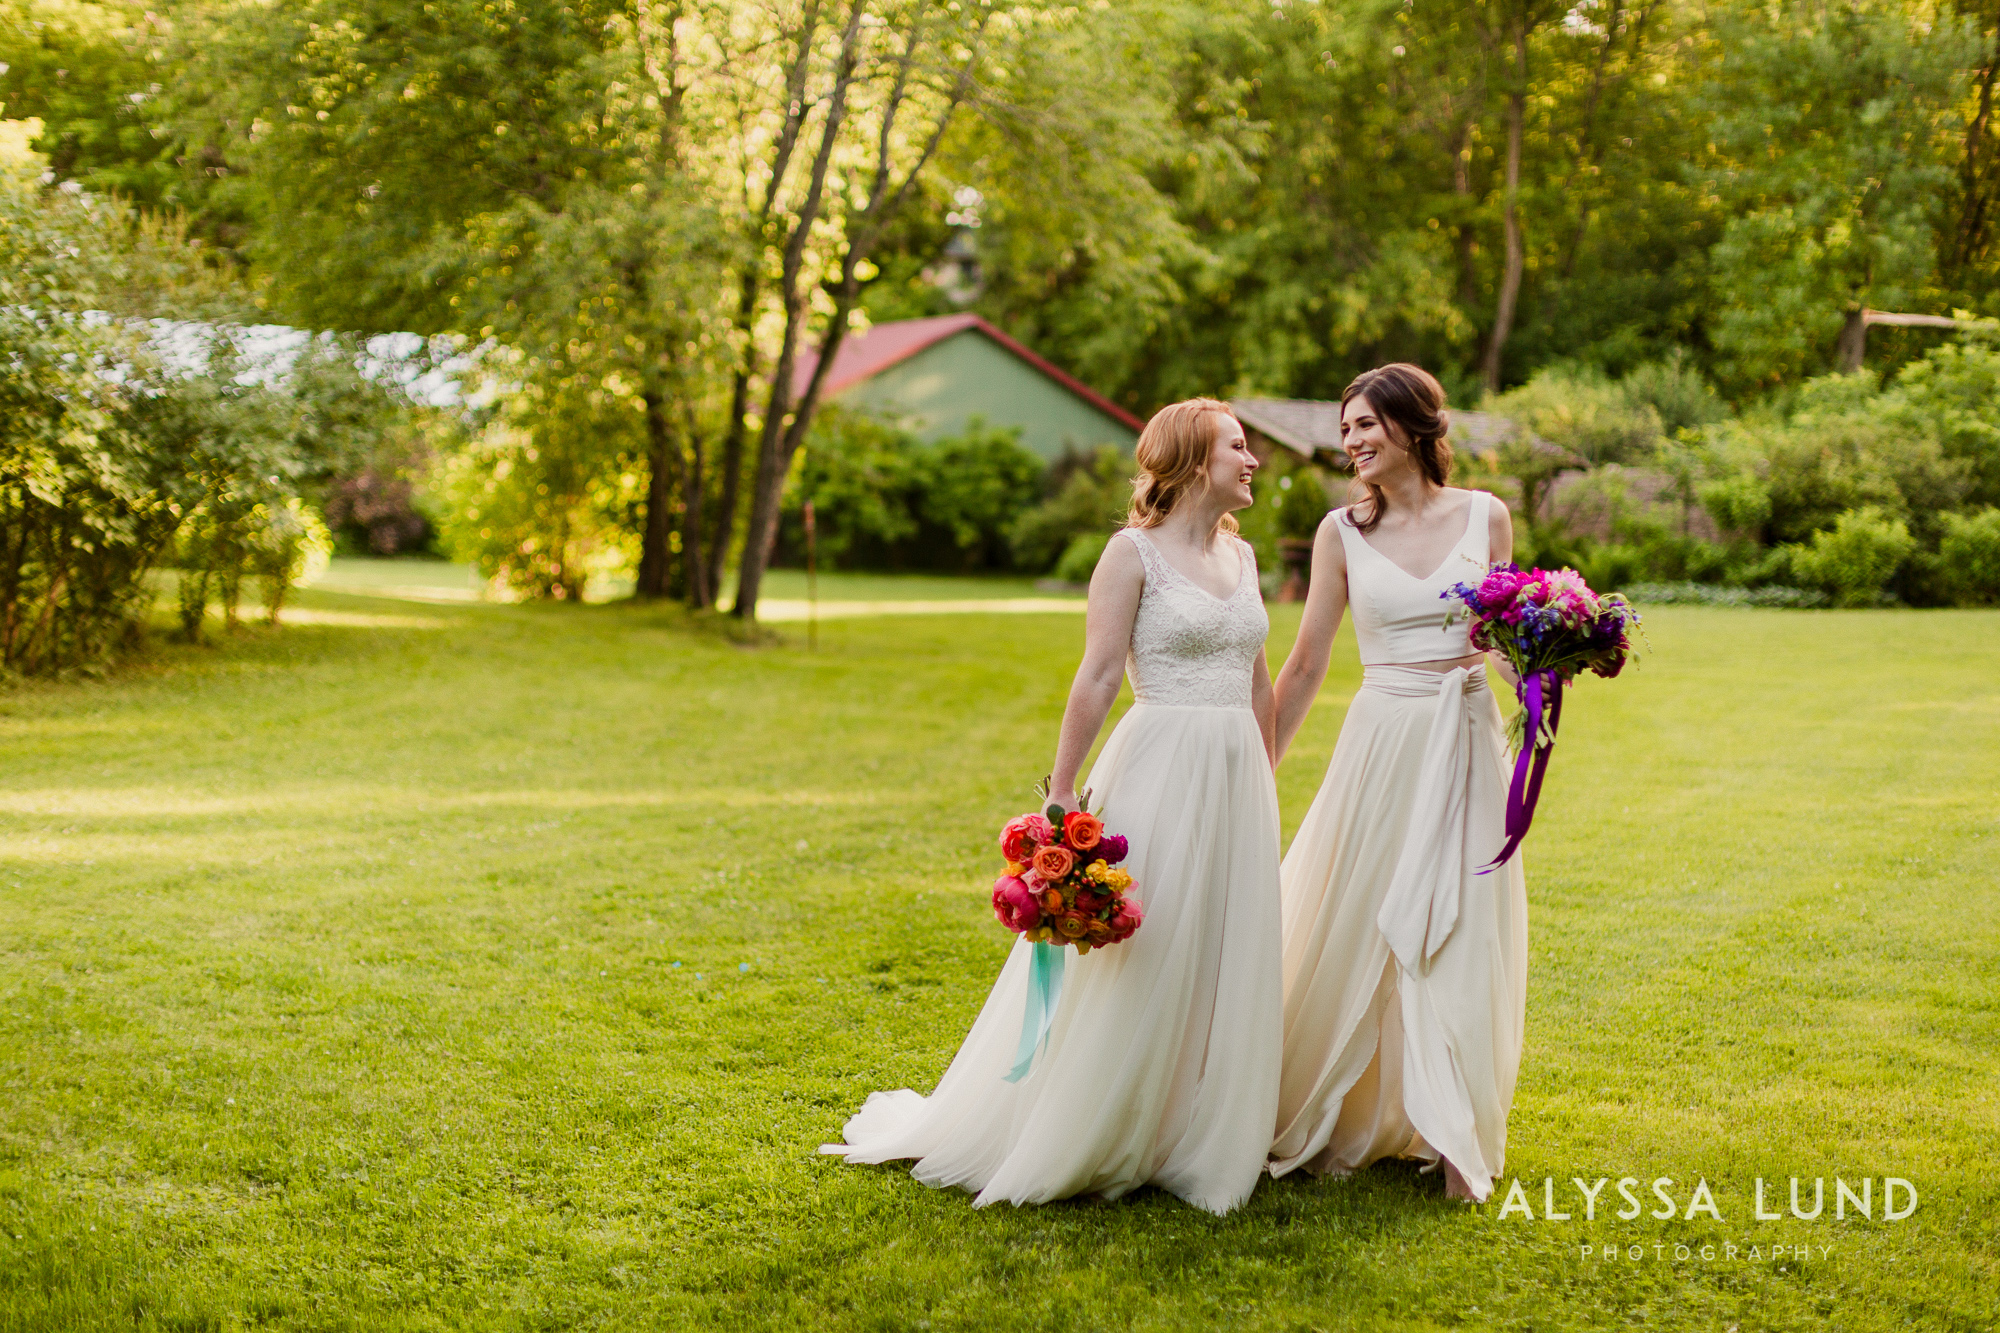 Queer wedding photography inspiration by Alyssa Lund Photography-33.jpg